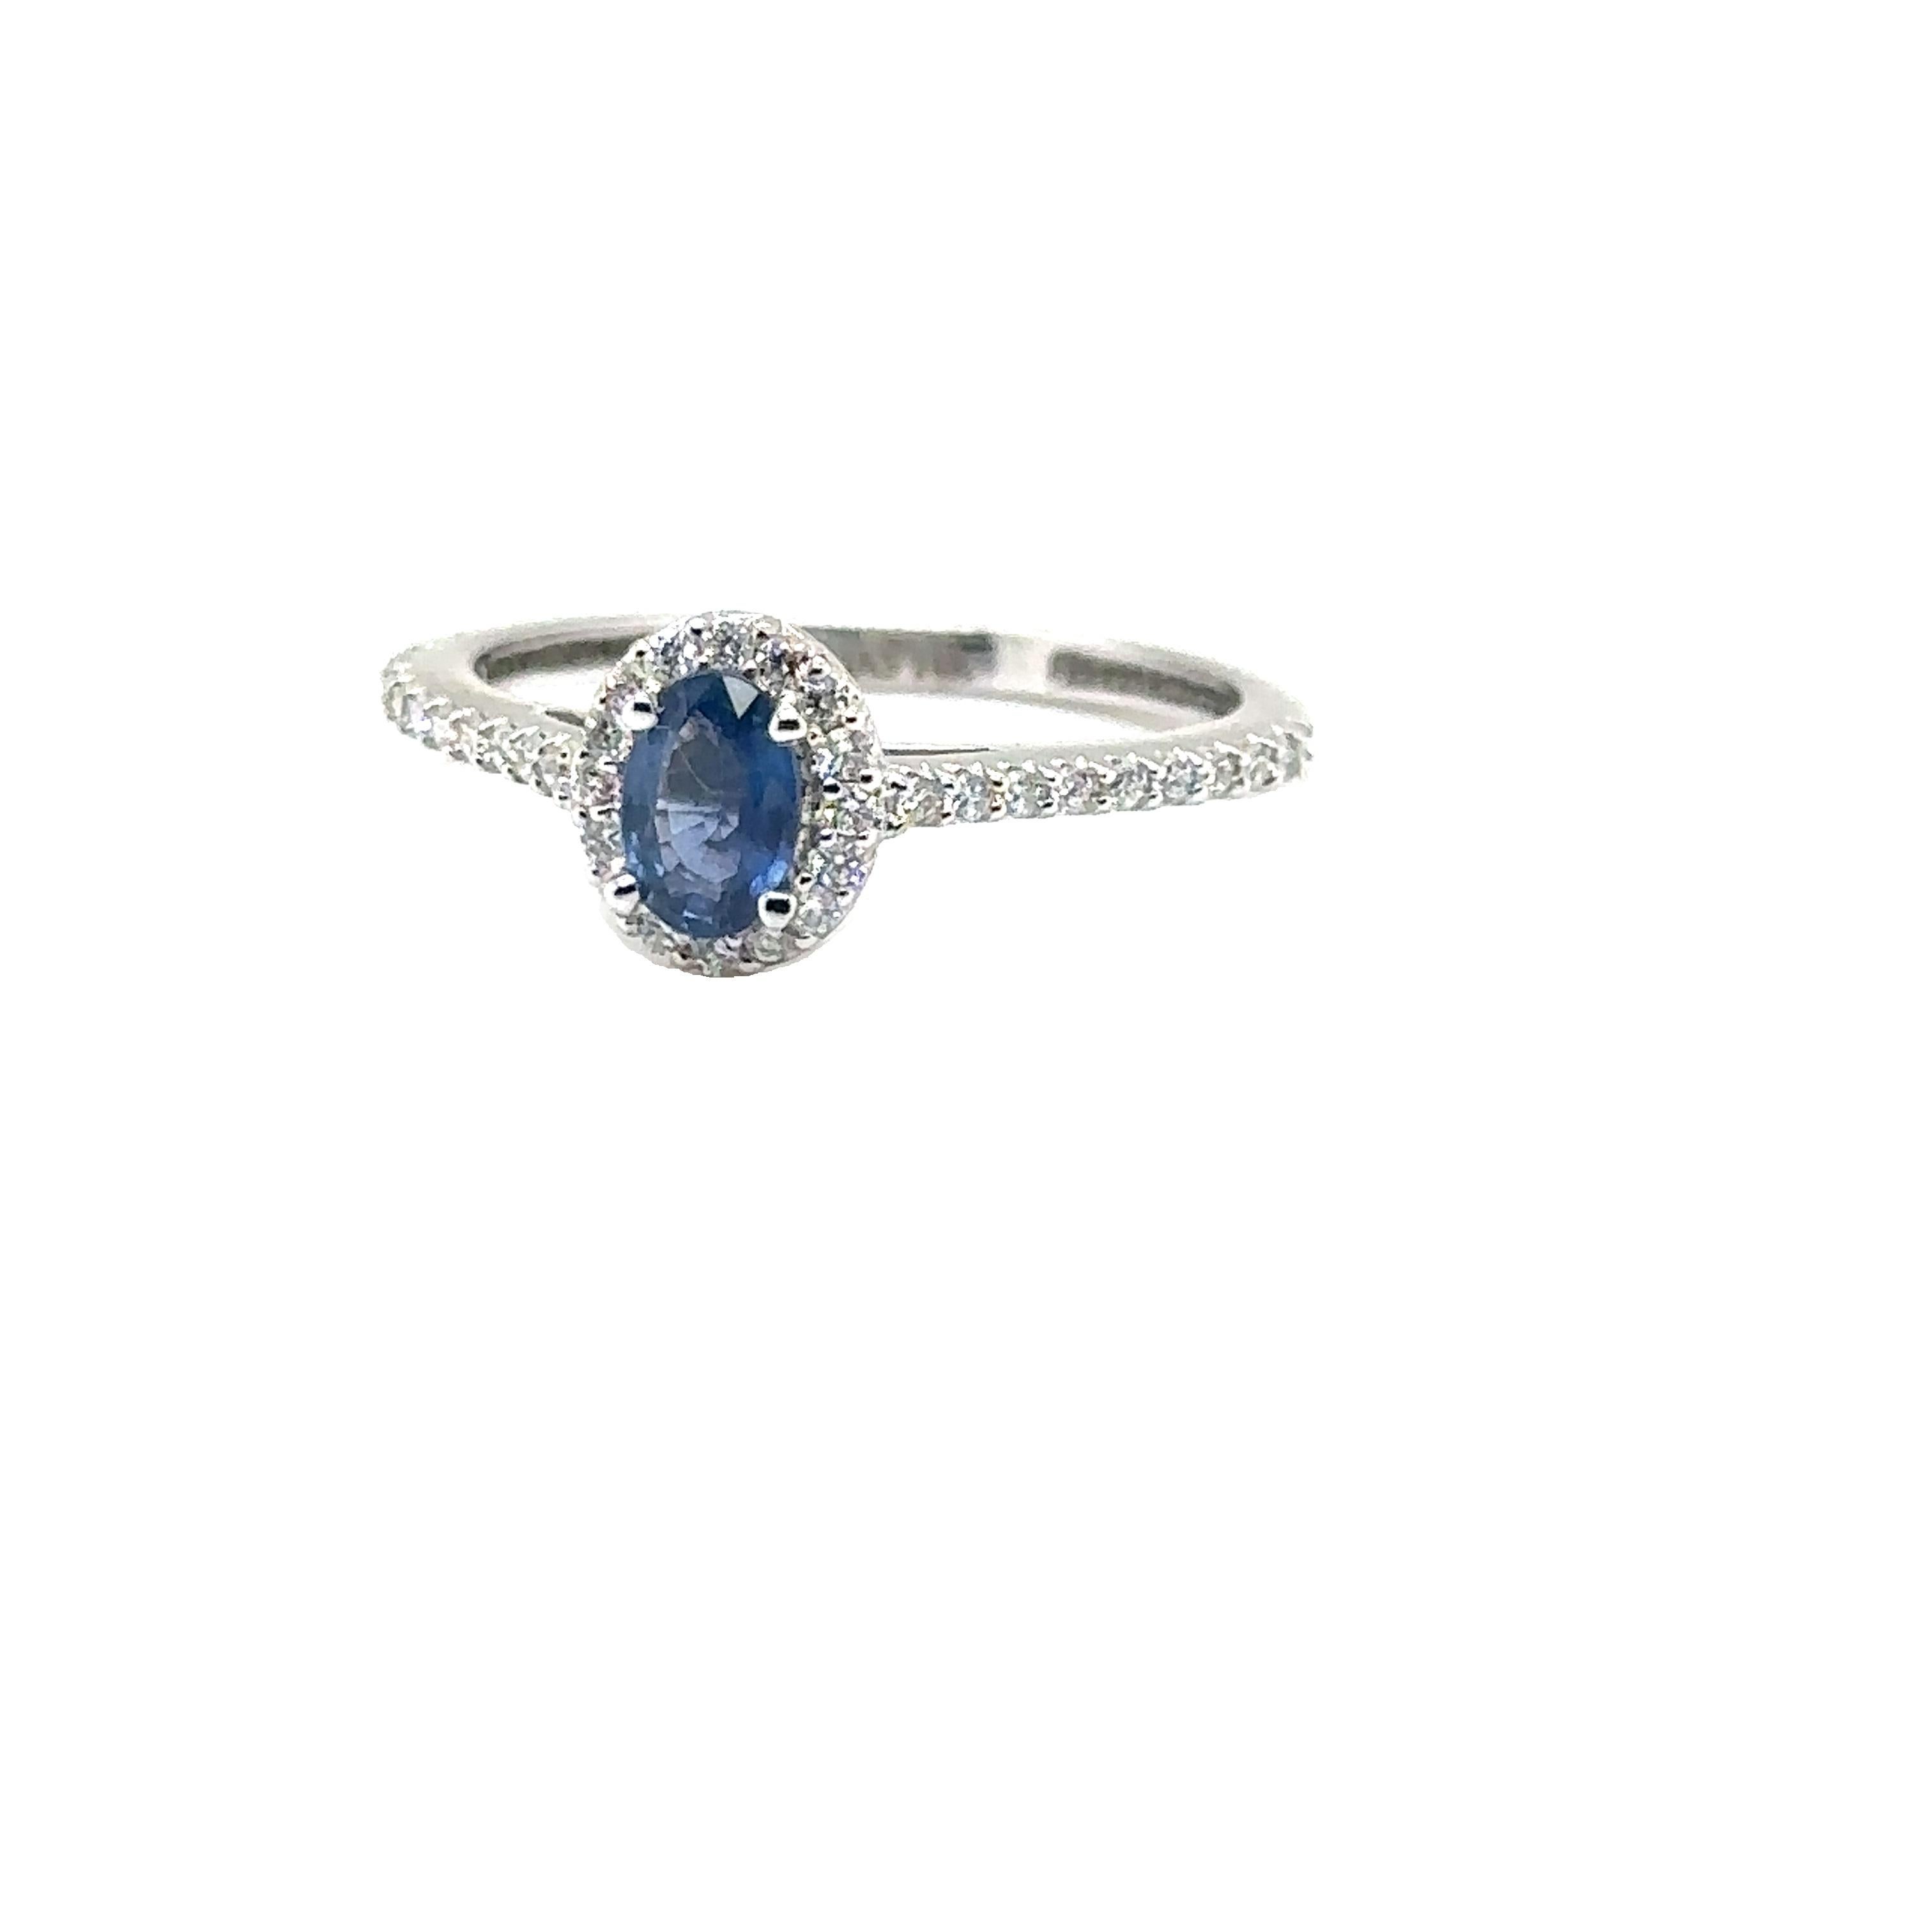 14K WHITE GOLD OVAL SAPPHIRE RING with DIAMONDS 
Metal: 14K WHITE GOLD
Diamond Info: GH SI DIAMONDS 0.20CT
Stone Info: 6X4 OVAL SAPPHIRE 0.52CT
Total Dia Weight: 0.20 cwt.
Total Stone Weight: 0.52 cwt.
Item Weight:  2.22 gm
Ring Size: 8